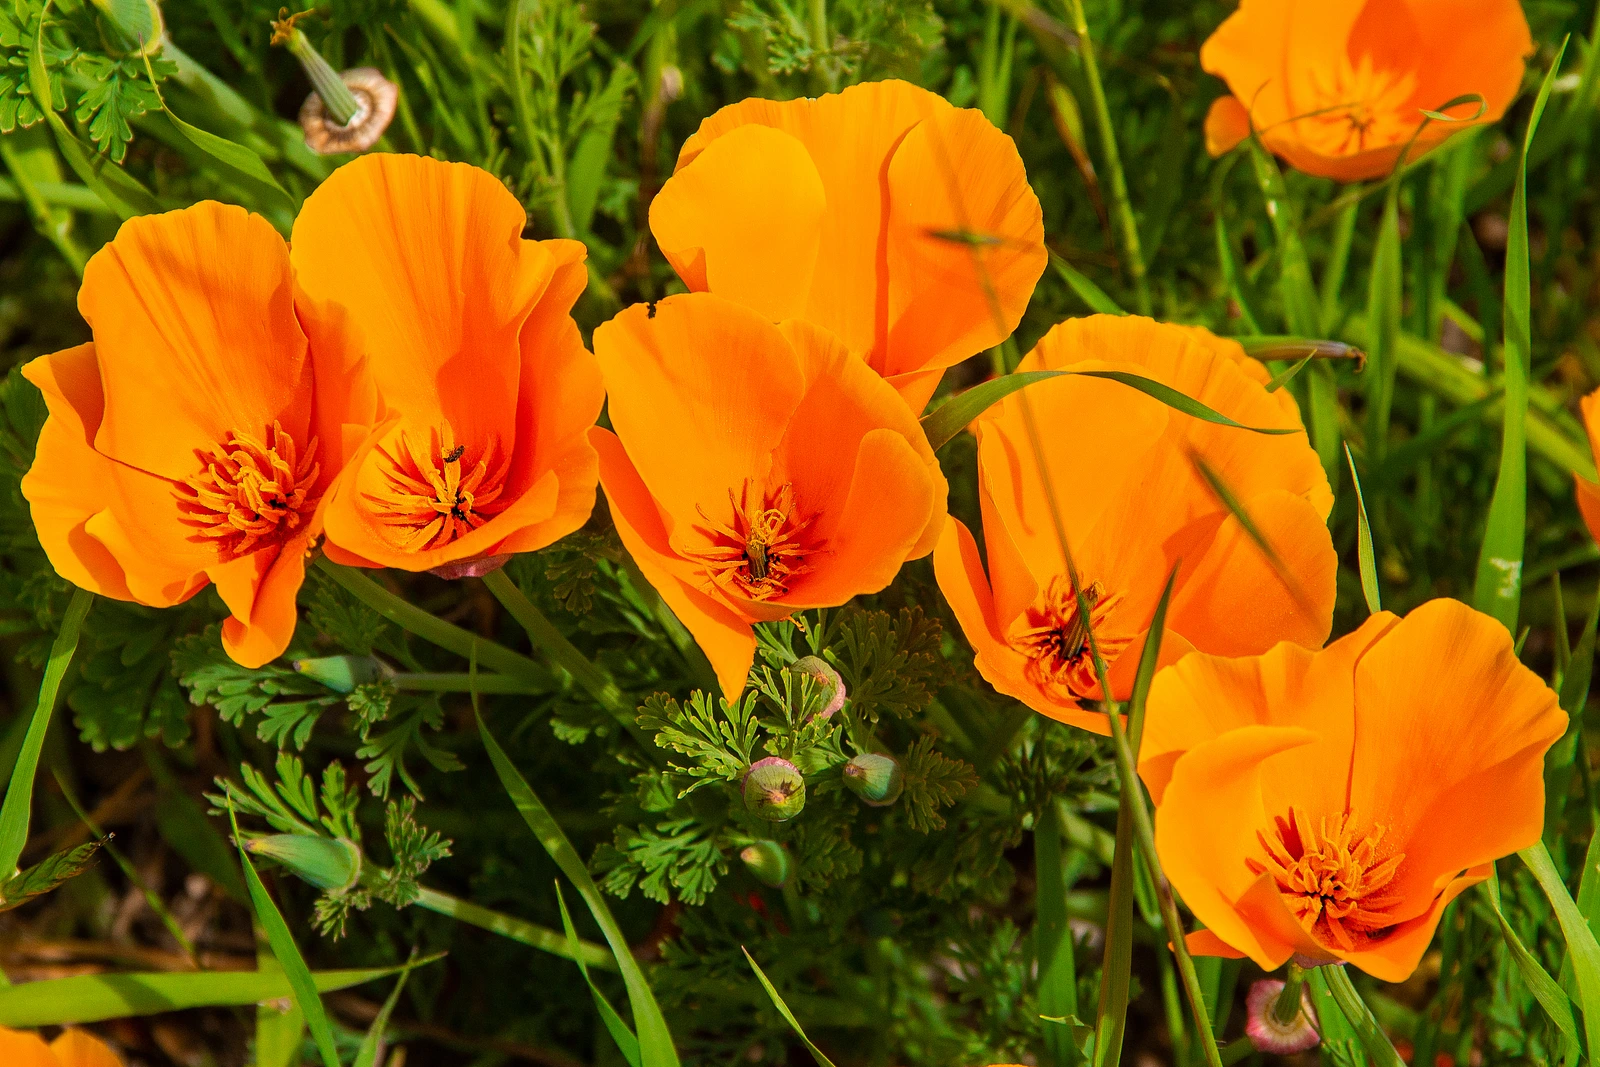 Poppies in bloom. On the California coast.